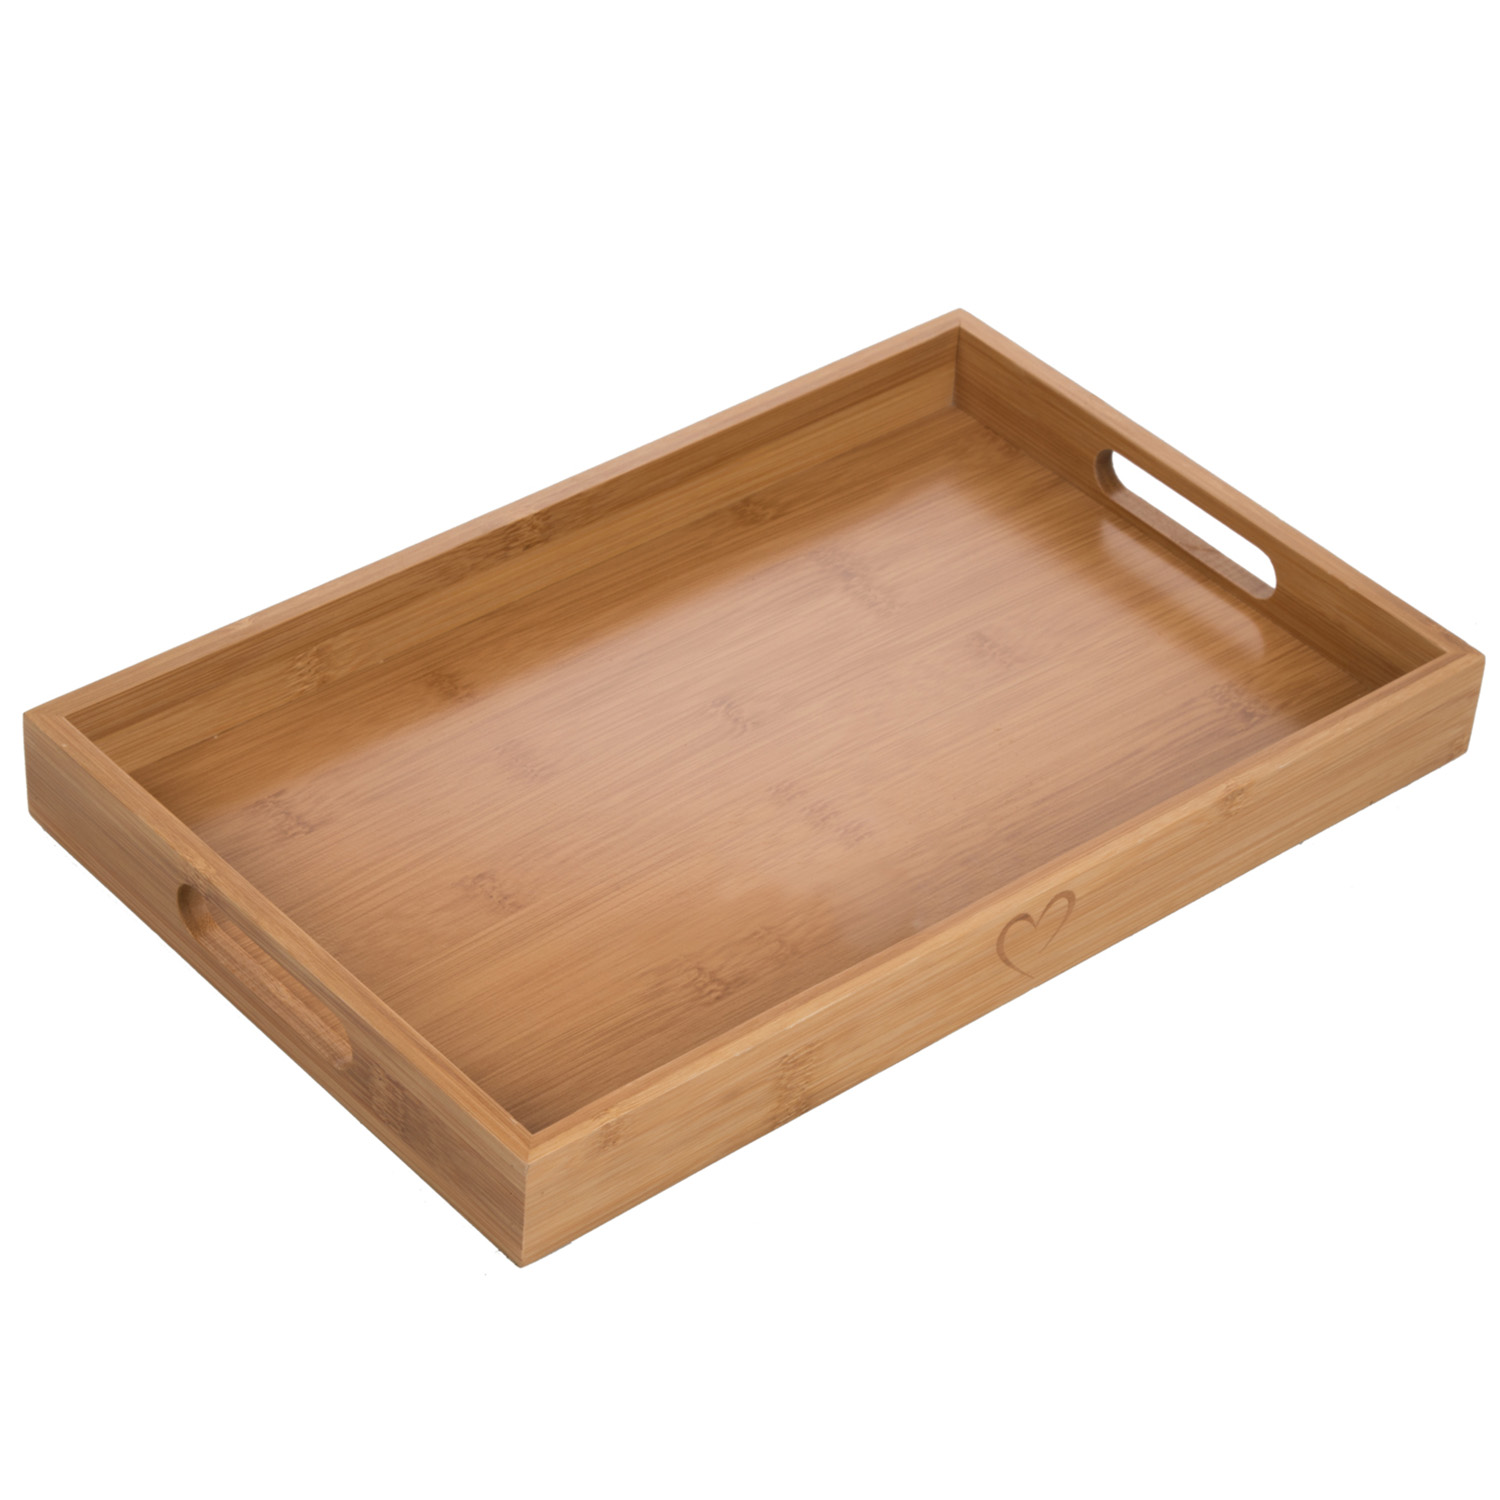 Brown Bamboo Serving Tray Image